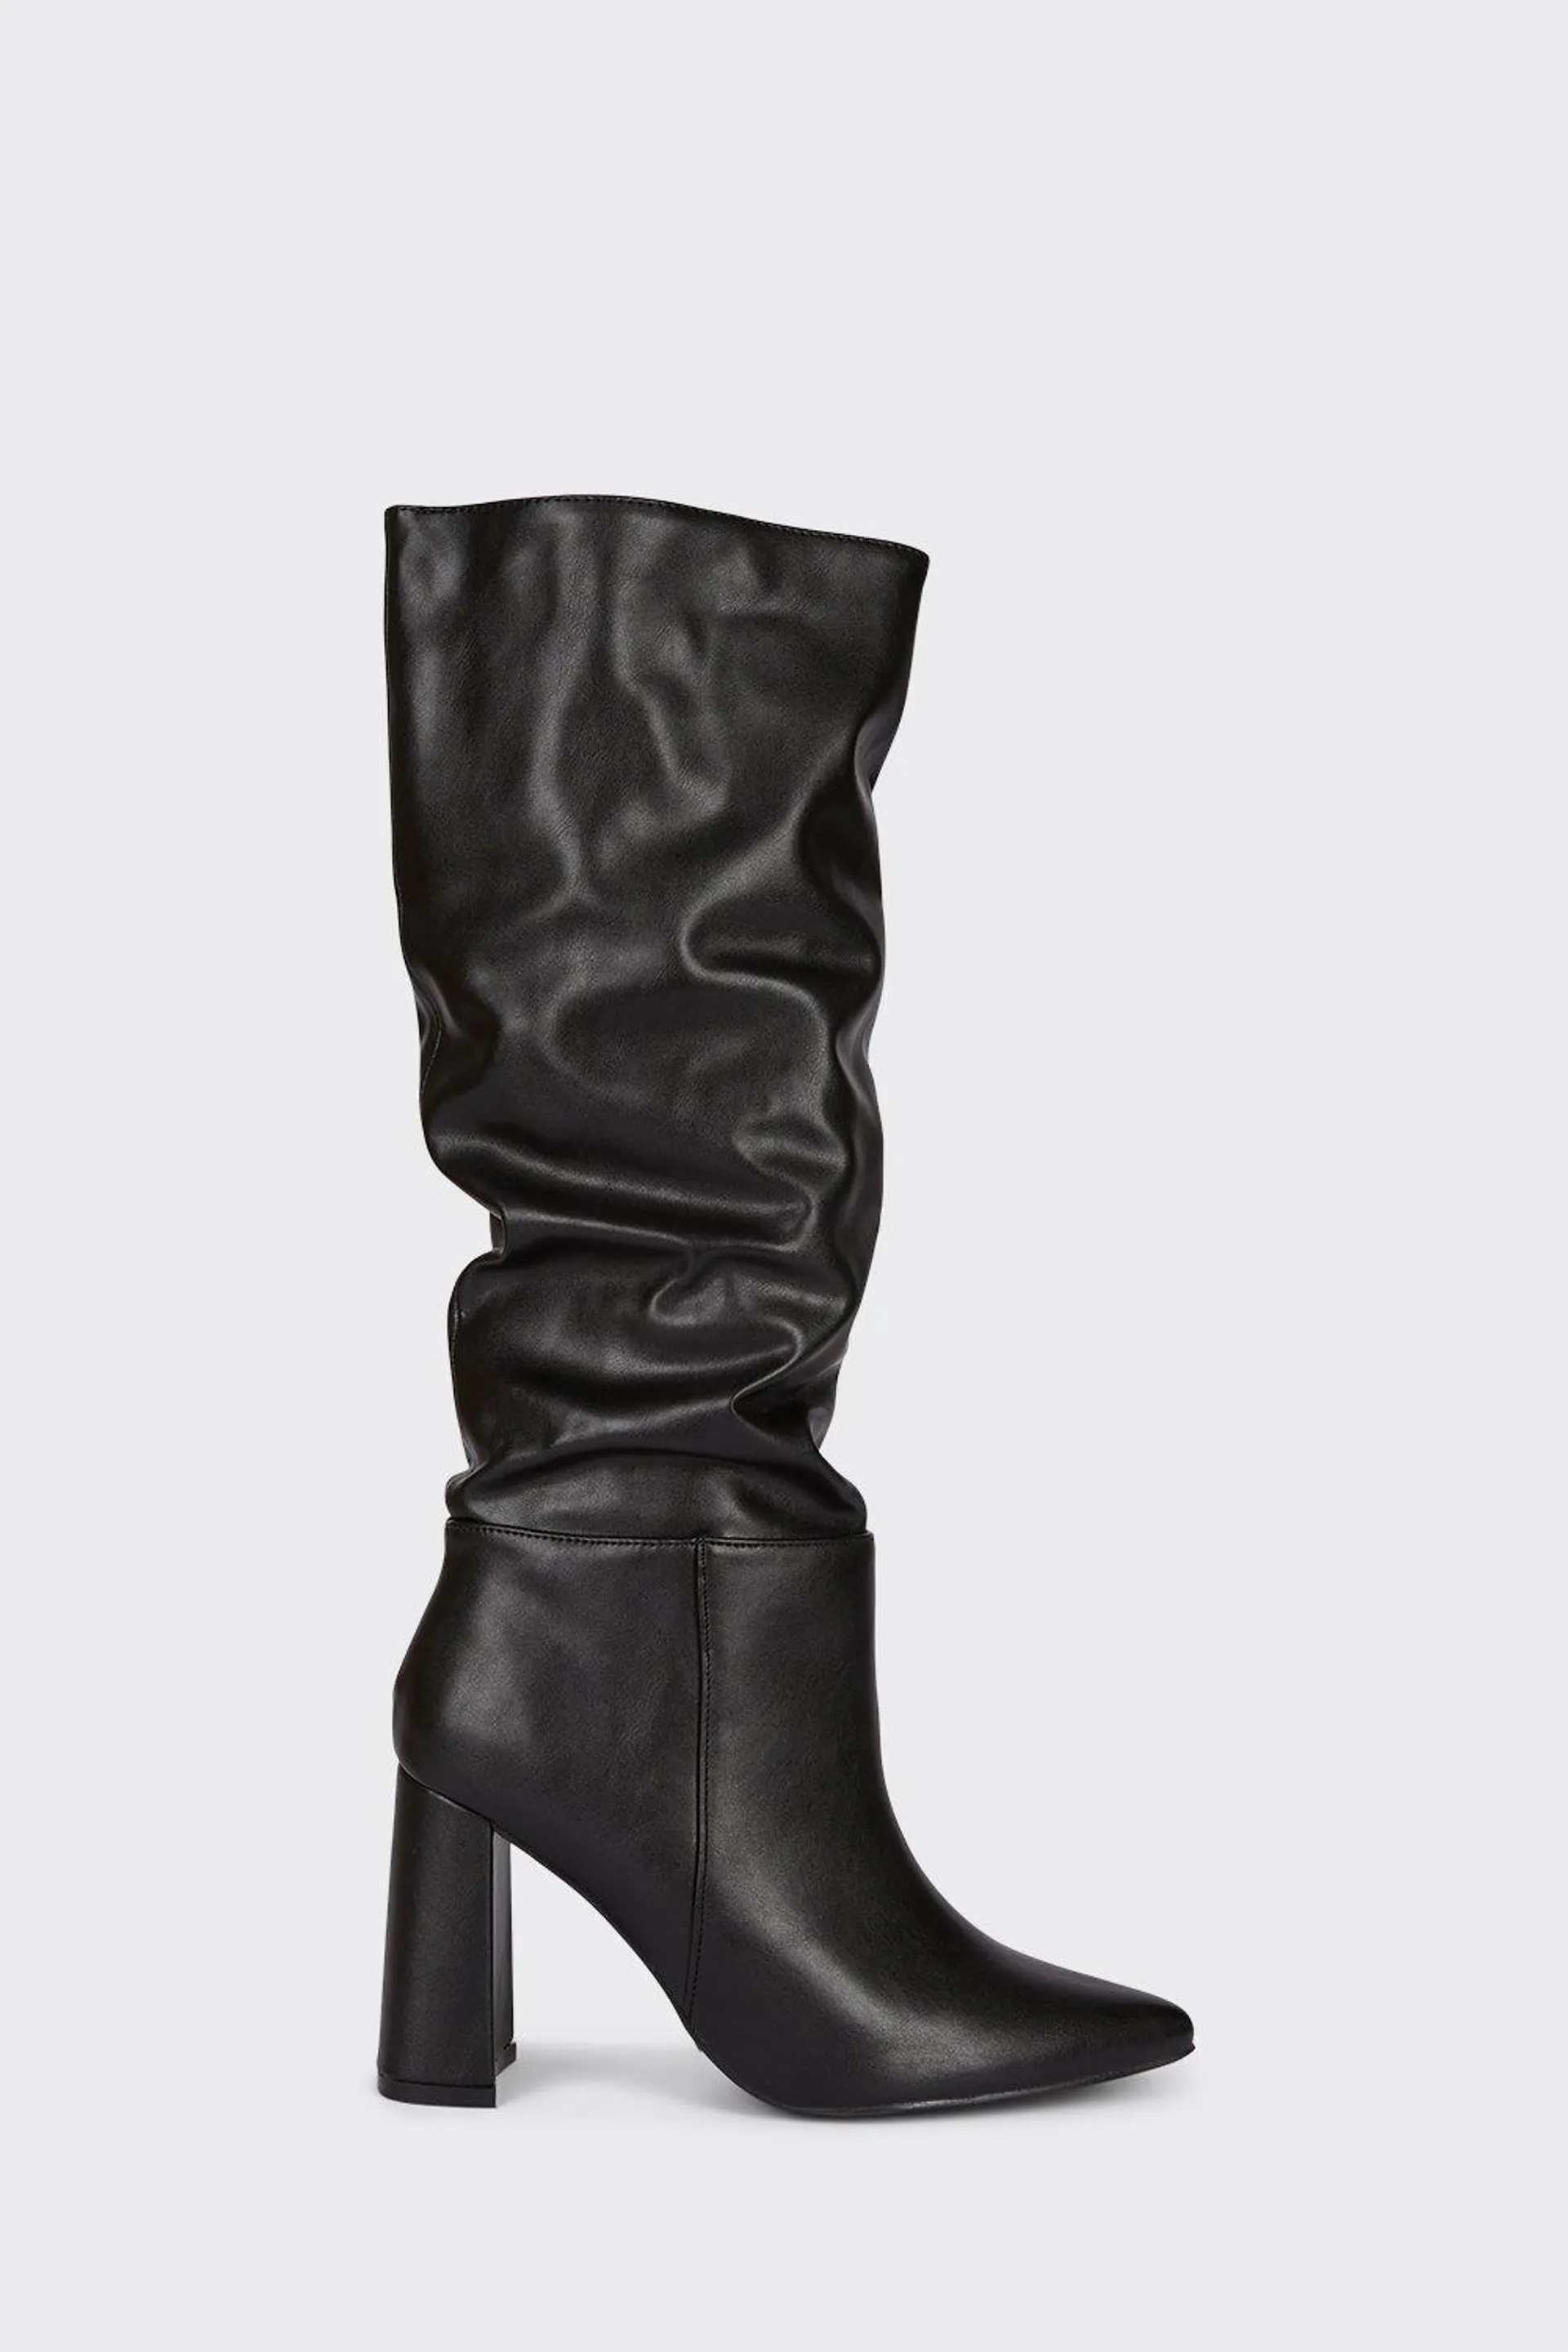 Krista Heeled Pointed Ruched Long Boots